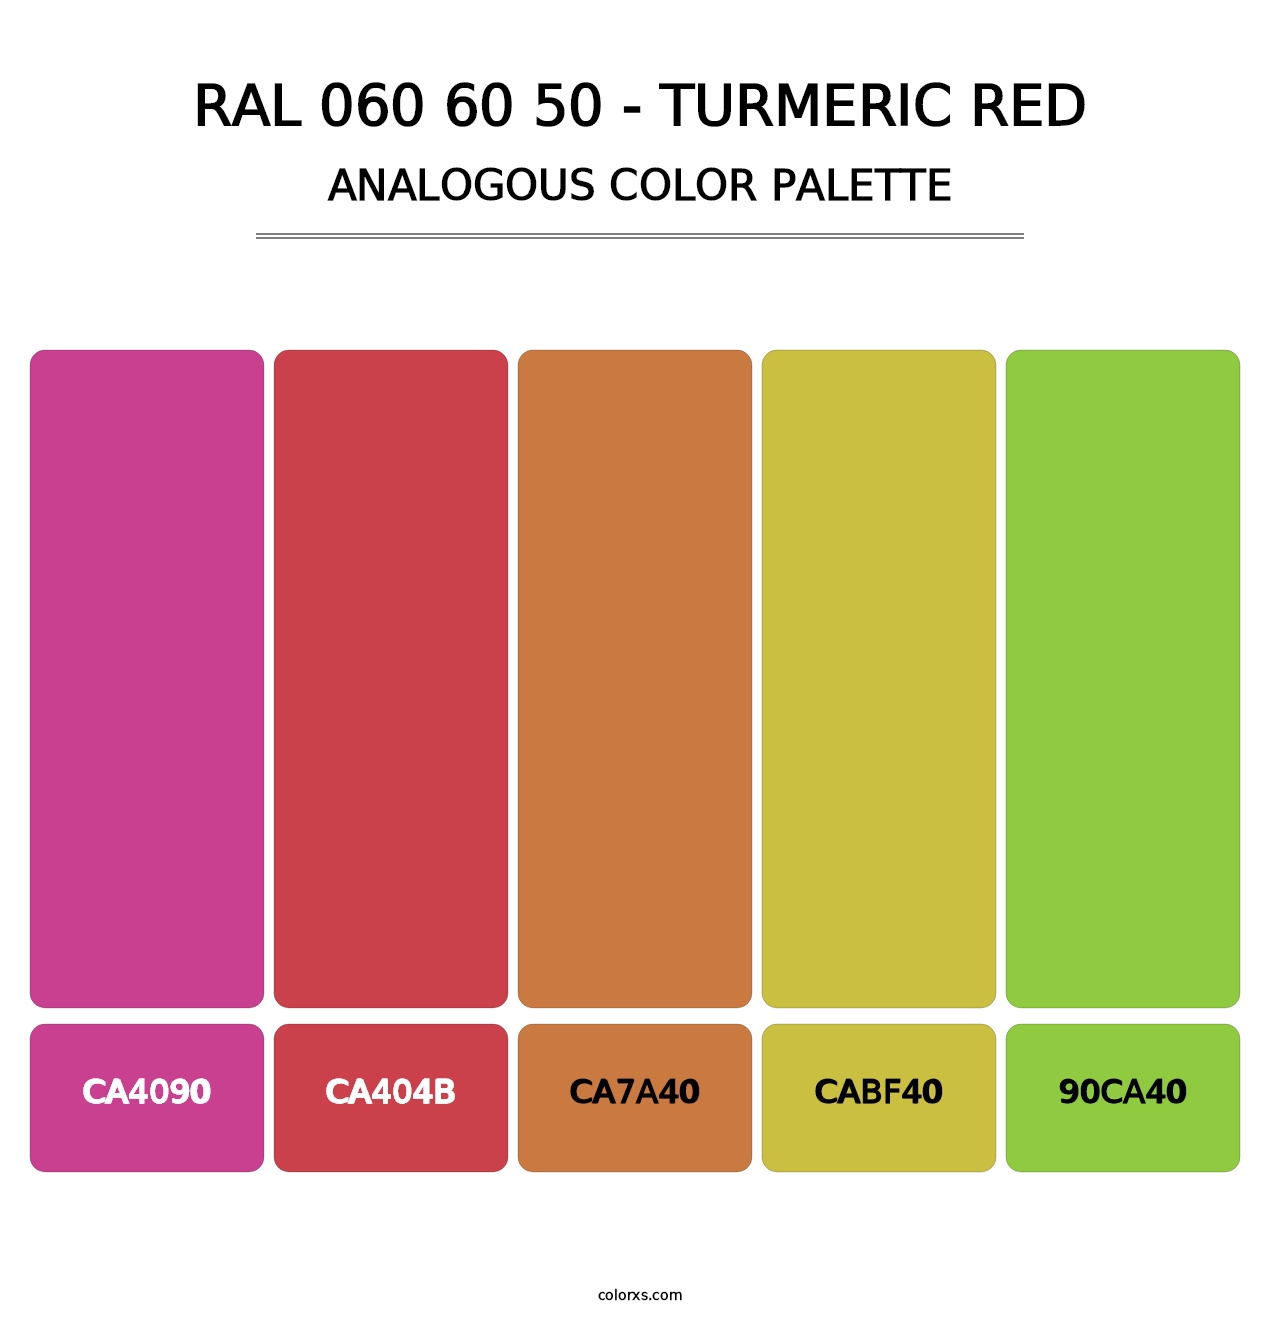 RAL 060 60 50 - Turmeric Red - Analogous Color Palette